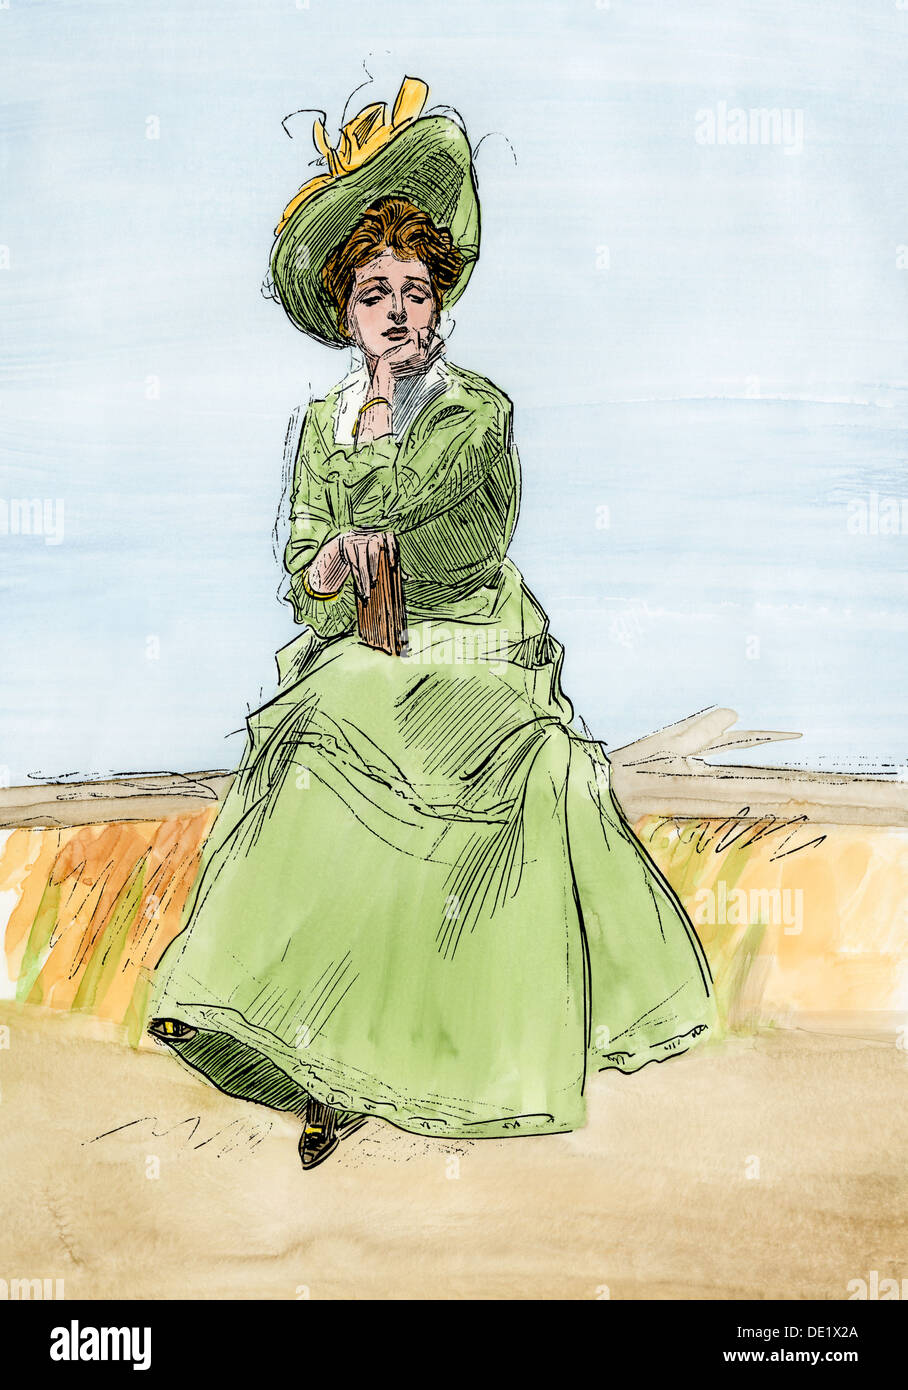 Fashionable young woman daydreaming, circa 1900. Hand-colored woodcut of a Charles Dana Gibson illustration Stock Photo